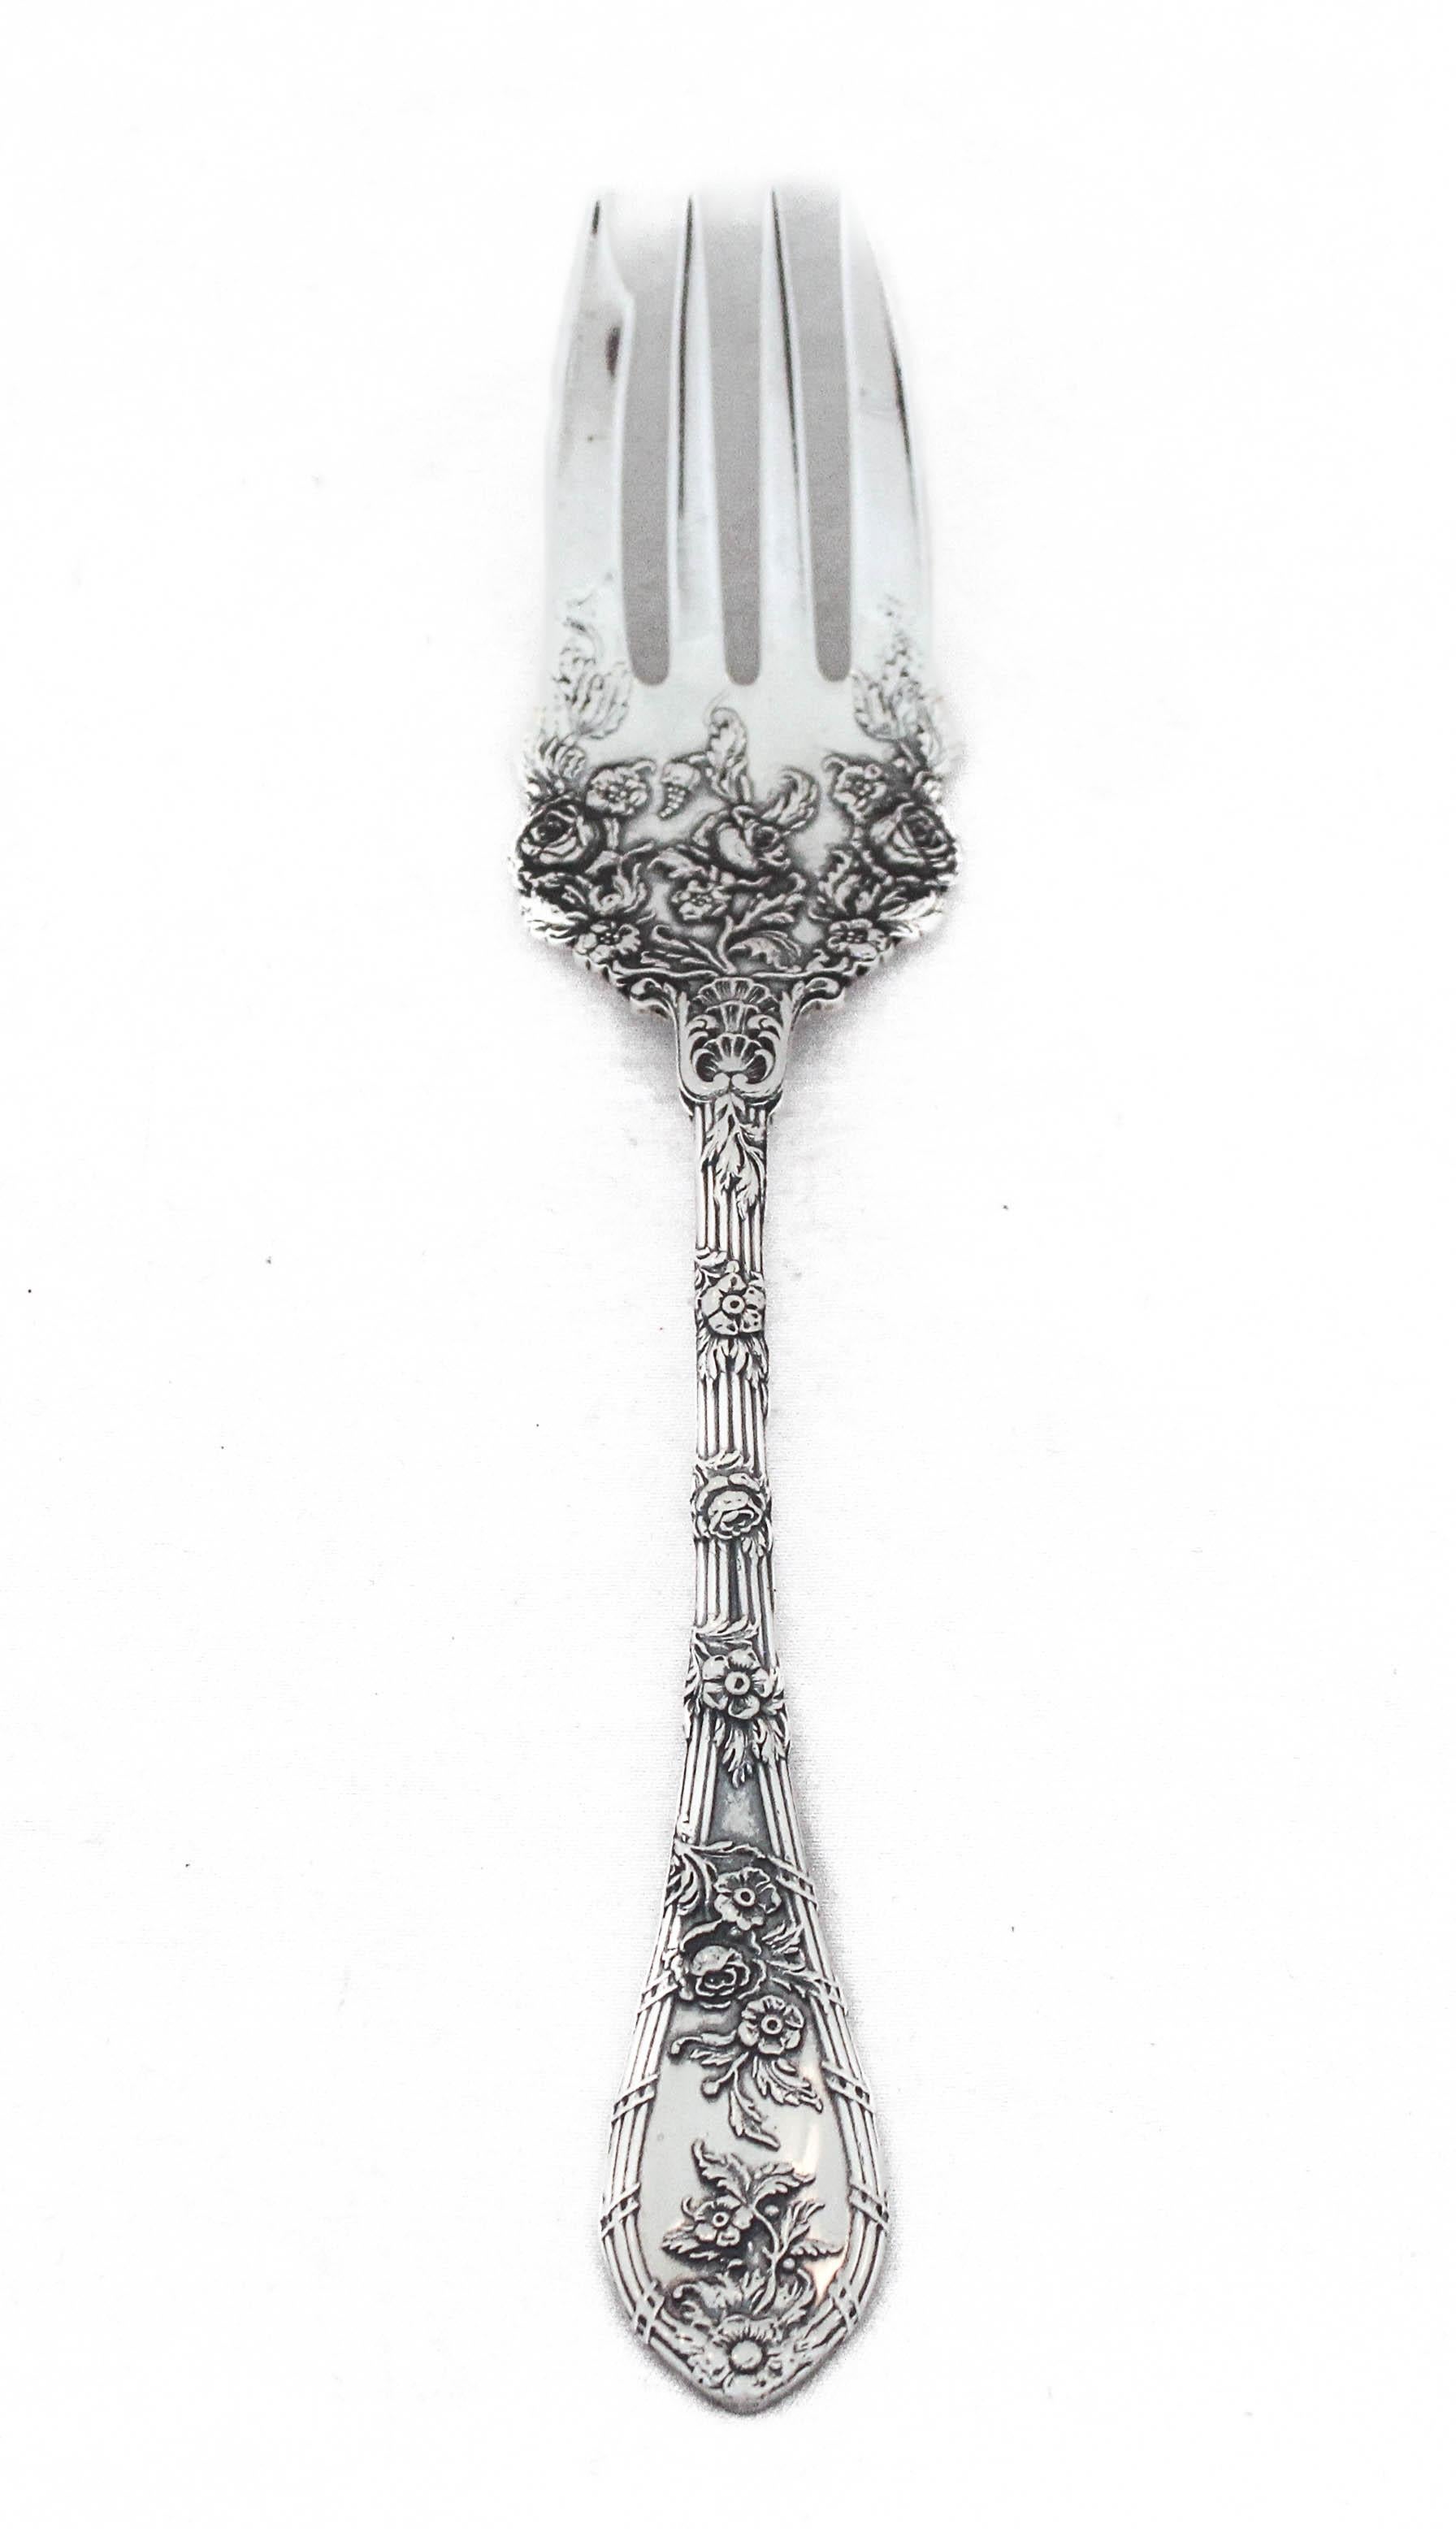 Being offered is a sterling silver flatware set by William Durgin Silver.  This is a service for 12: 5 pieces per setting, 60 pieces total. 
The craftsmanship and design on this pattern is simply stunning.  Raised flowers wrap around each handle